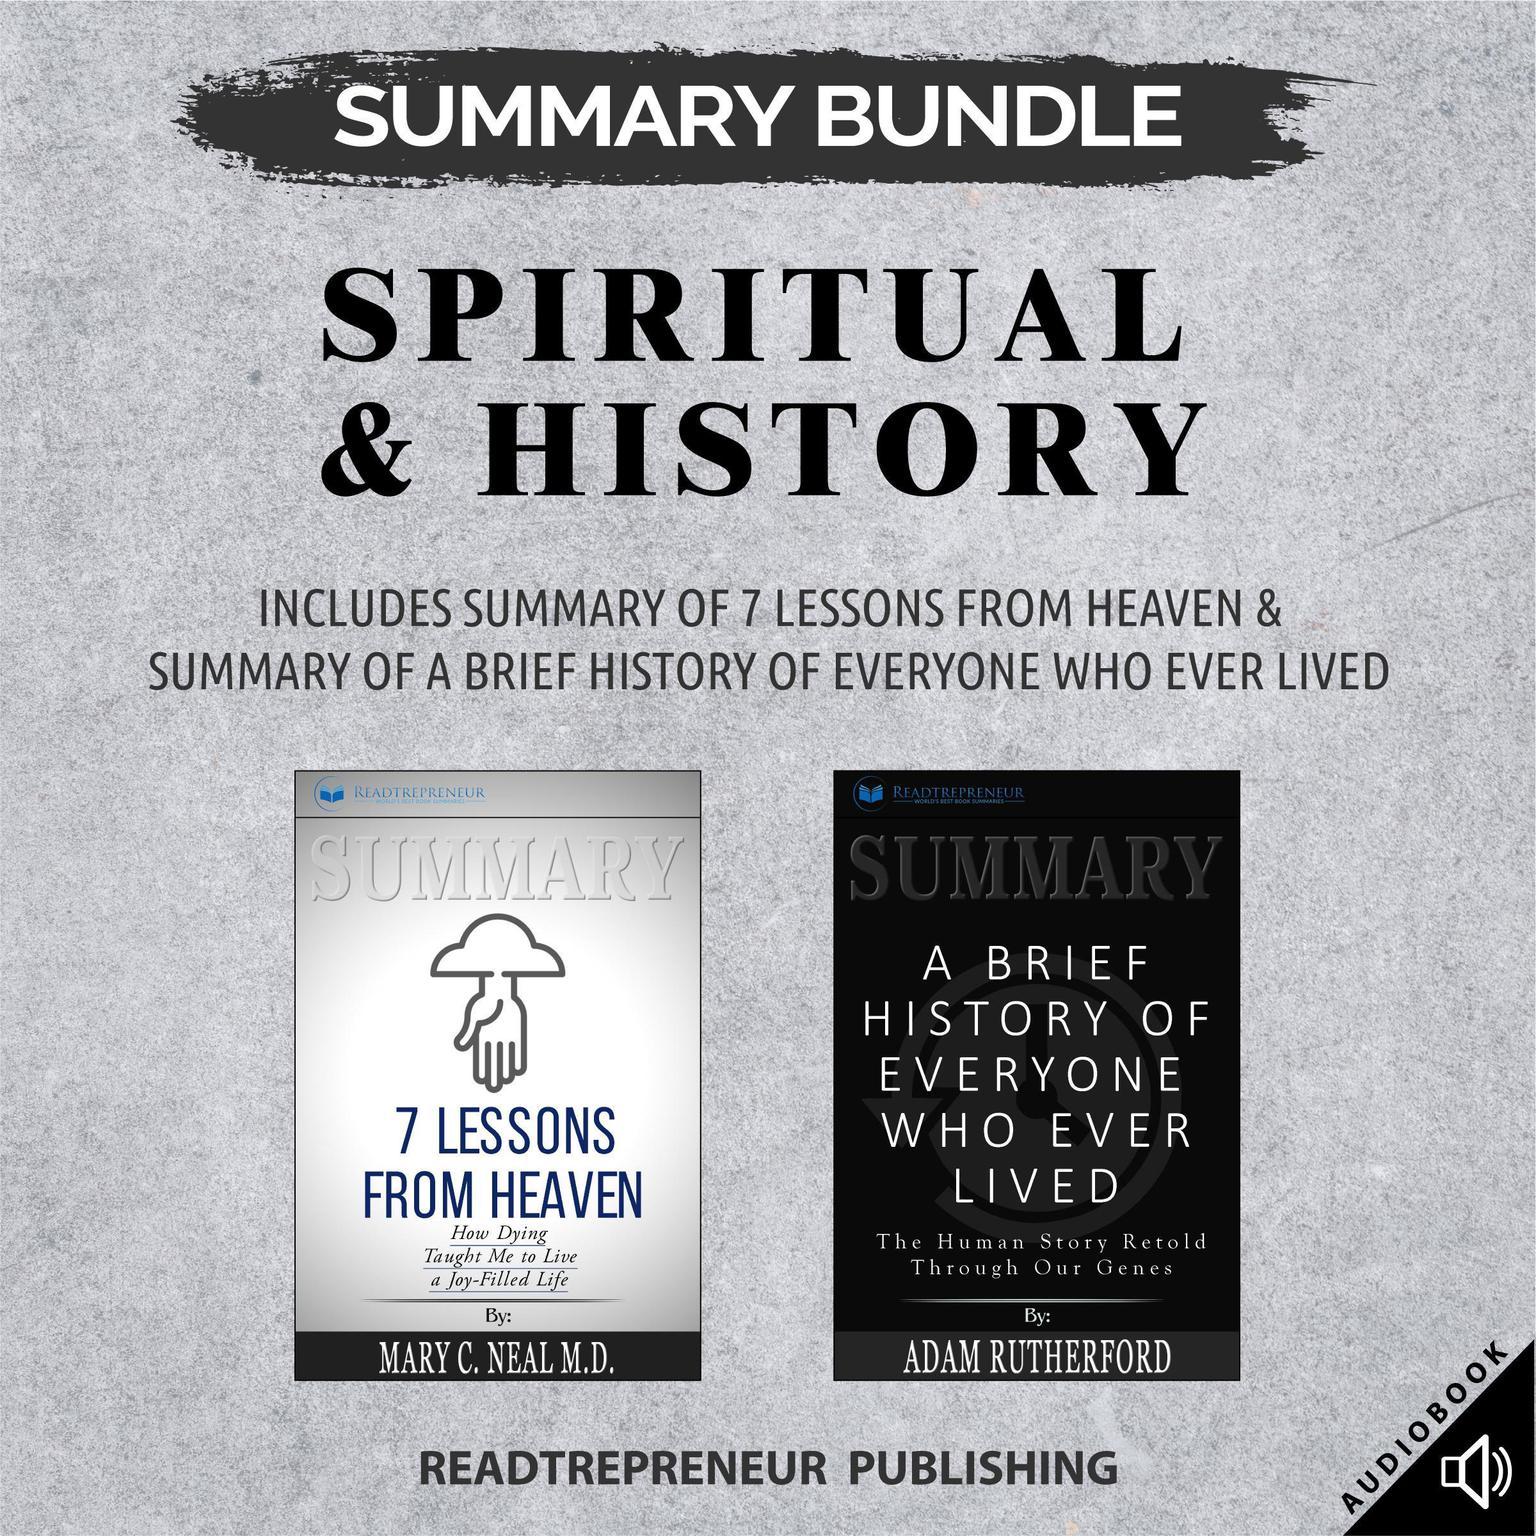 Summary Bundle: Spiritual & History | Readtrepreneur Publishing: Includes Summary of 7 Lessons from Heaven & Summary of A Brief History of Everyone Who Ever Lived: Includes Summary of 7 Lessons from Heaven & Summary of A Brief History of Everyone Who Ever Lived Audiobook, by Readtrepreneur Publishing